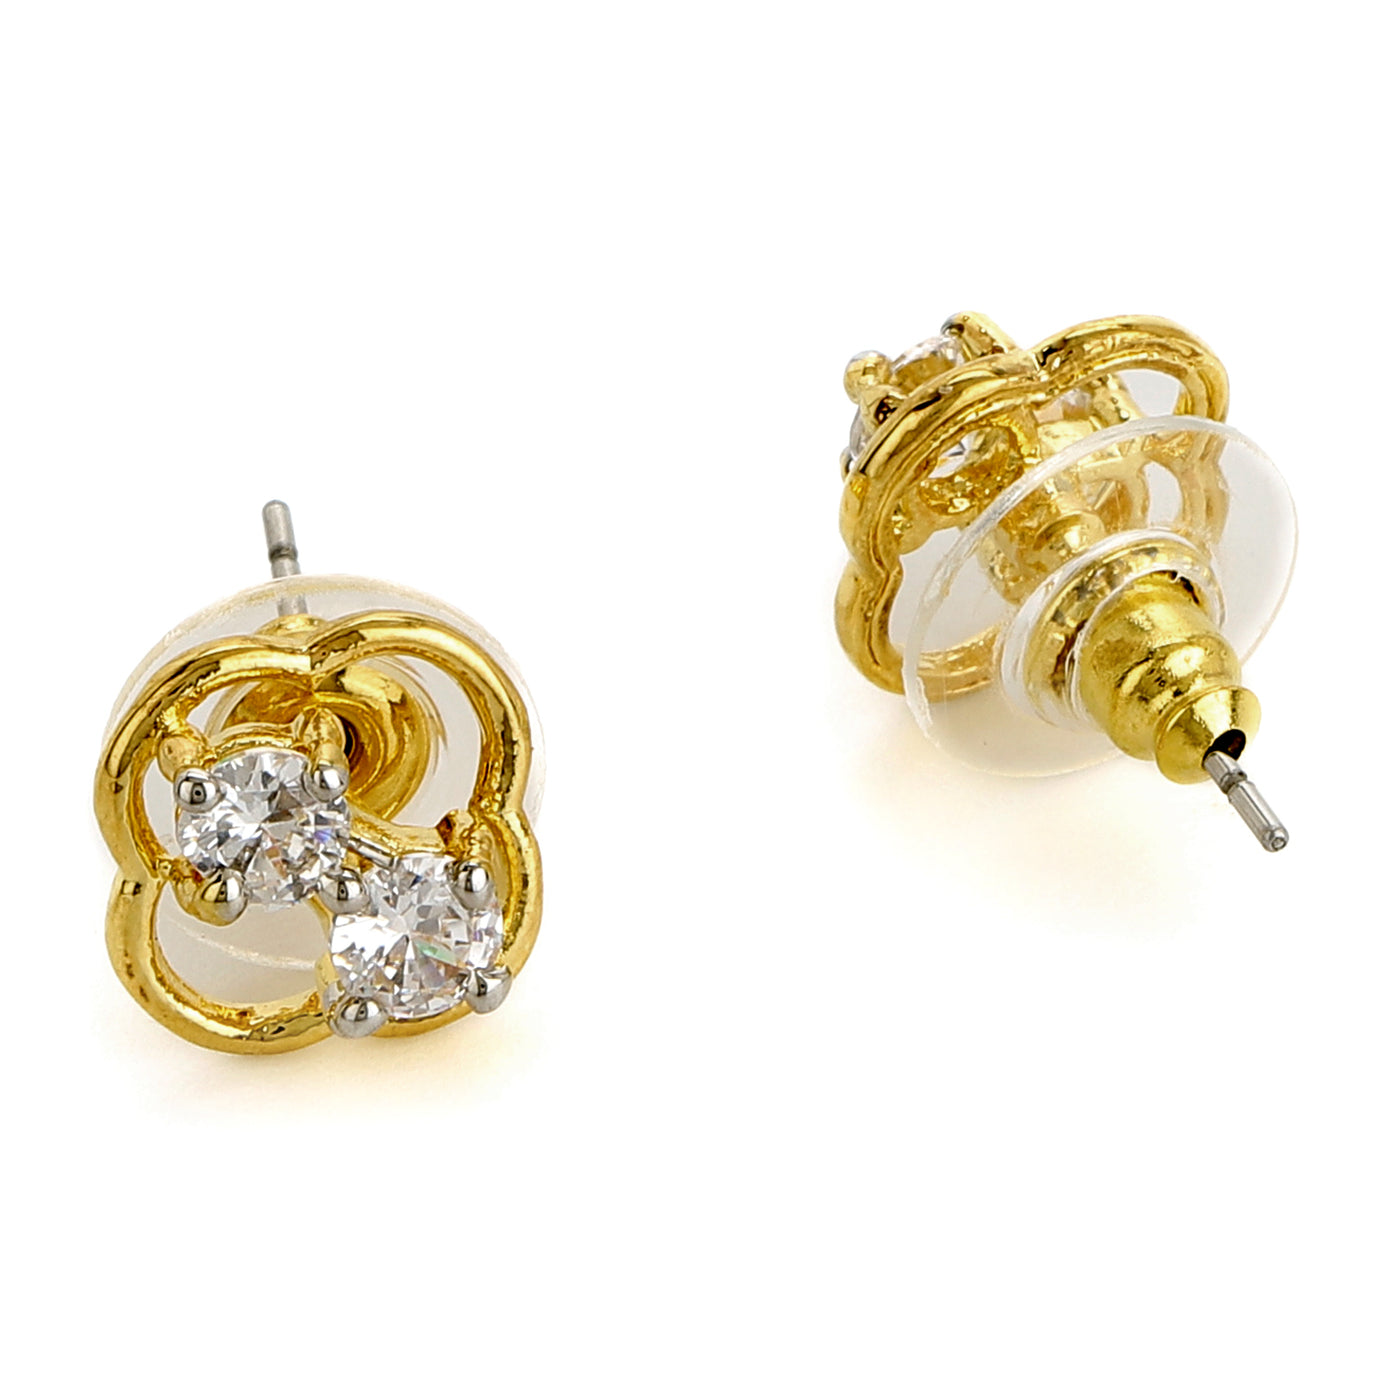 Gold Tone Plated Stud Earrings With Ad Stone